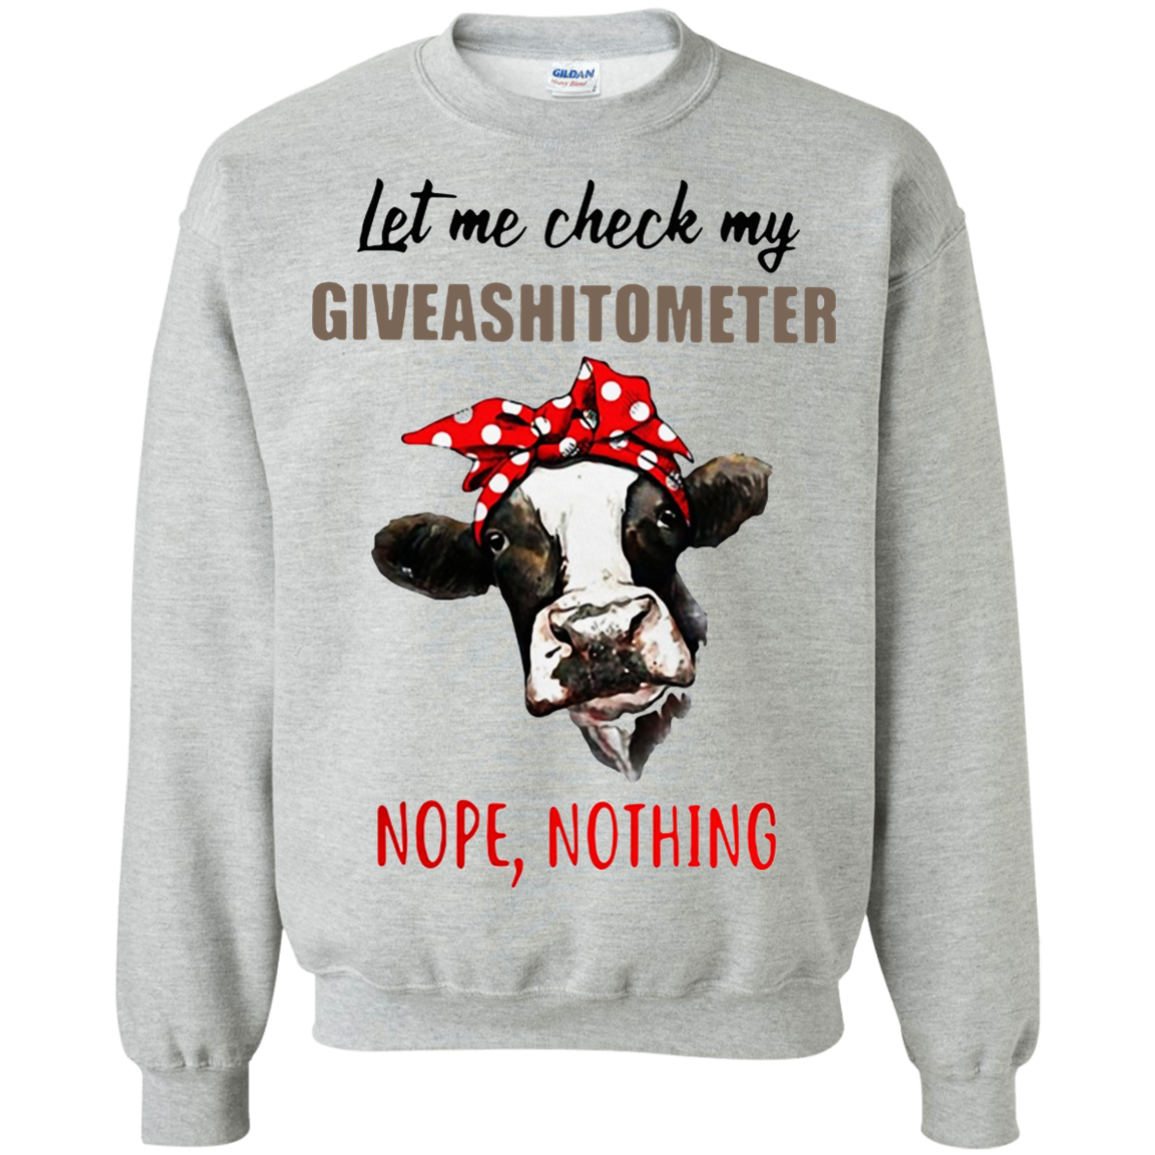 Cow Let Me Check My Giveashitometer Nope Nothing Shirt G180 Crewneck Pullover 8 Oz.